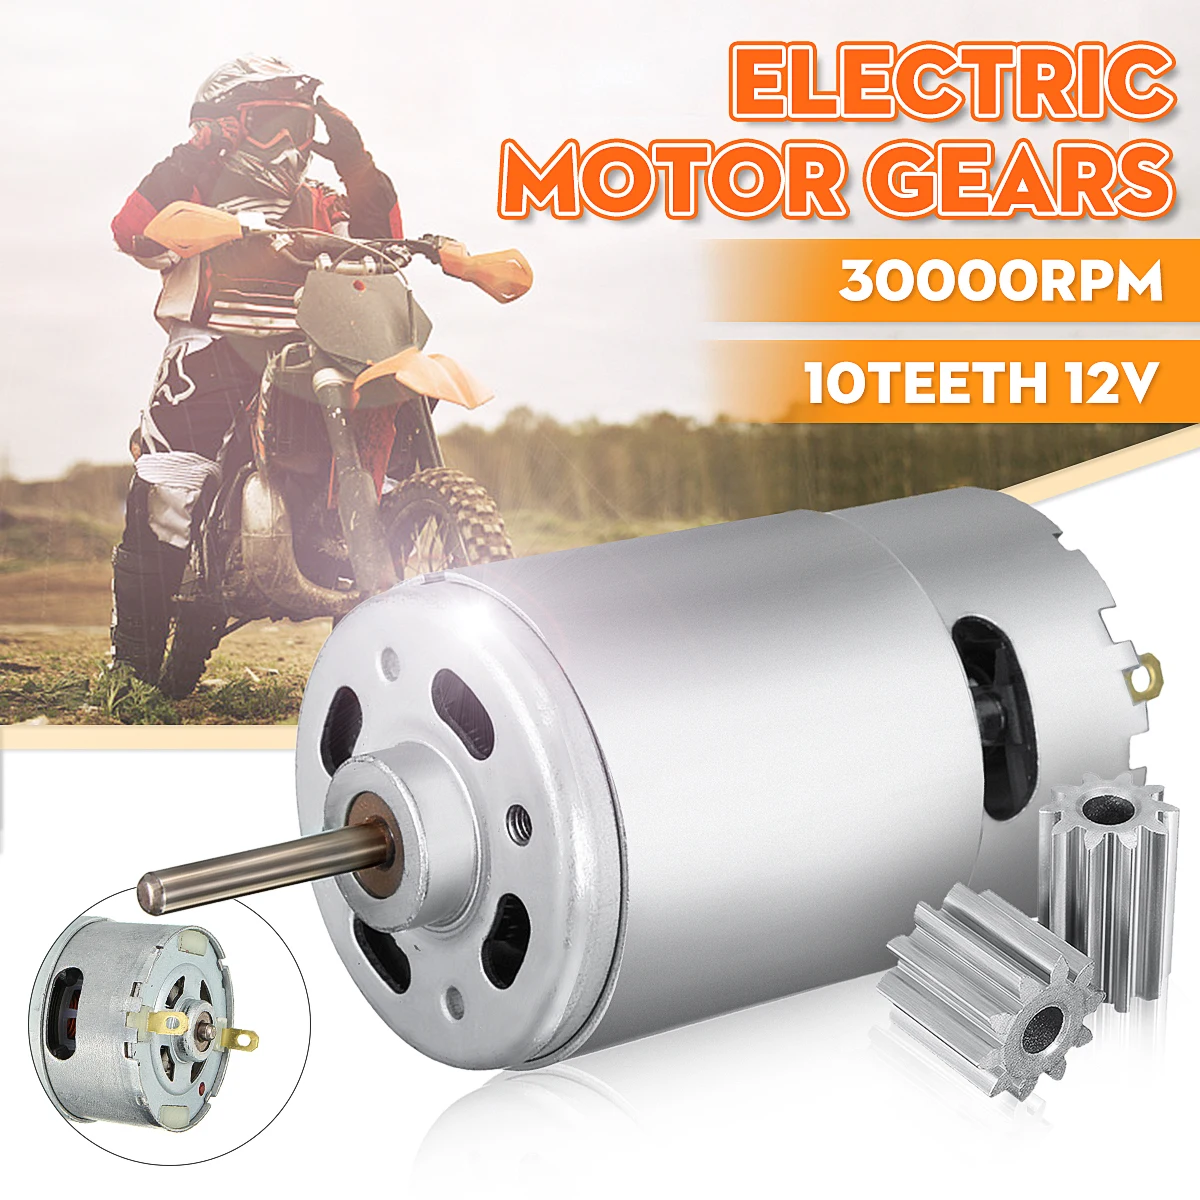 12V 30000RPM Electric Motor Gear Box W/ 2 Gears For Kids Ride On Car Toy Parts 